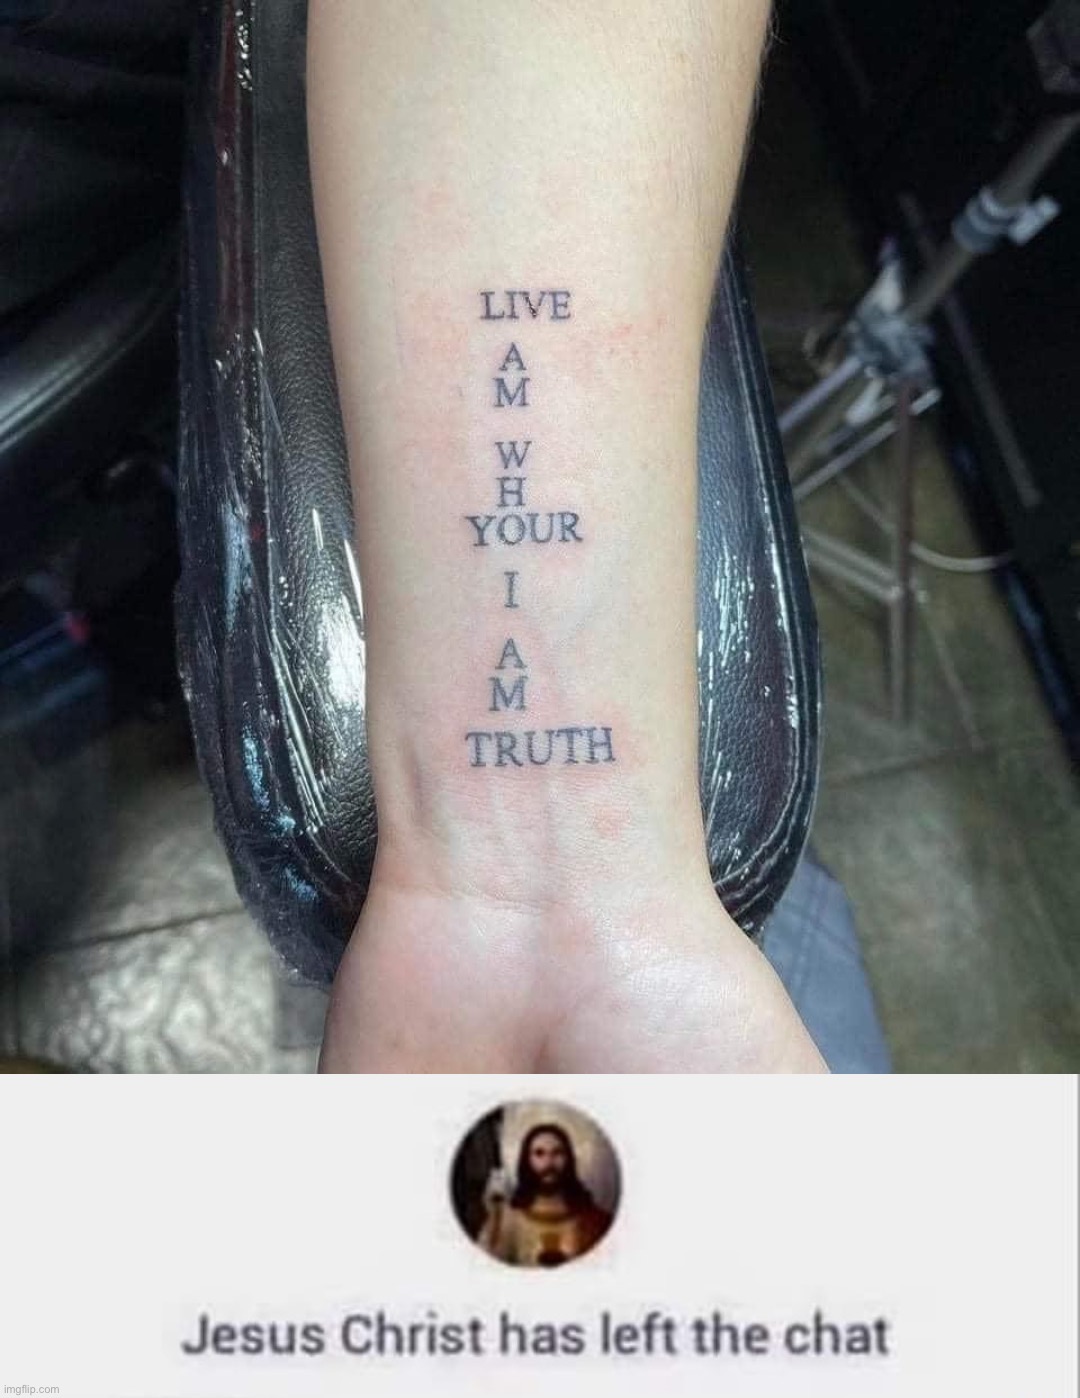 so painful | image tagged in fail tattoo,jesus has left the chat,repost,tattoos,tattoo,bad tattoos | made w/ Imgflip meme maker